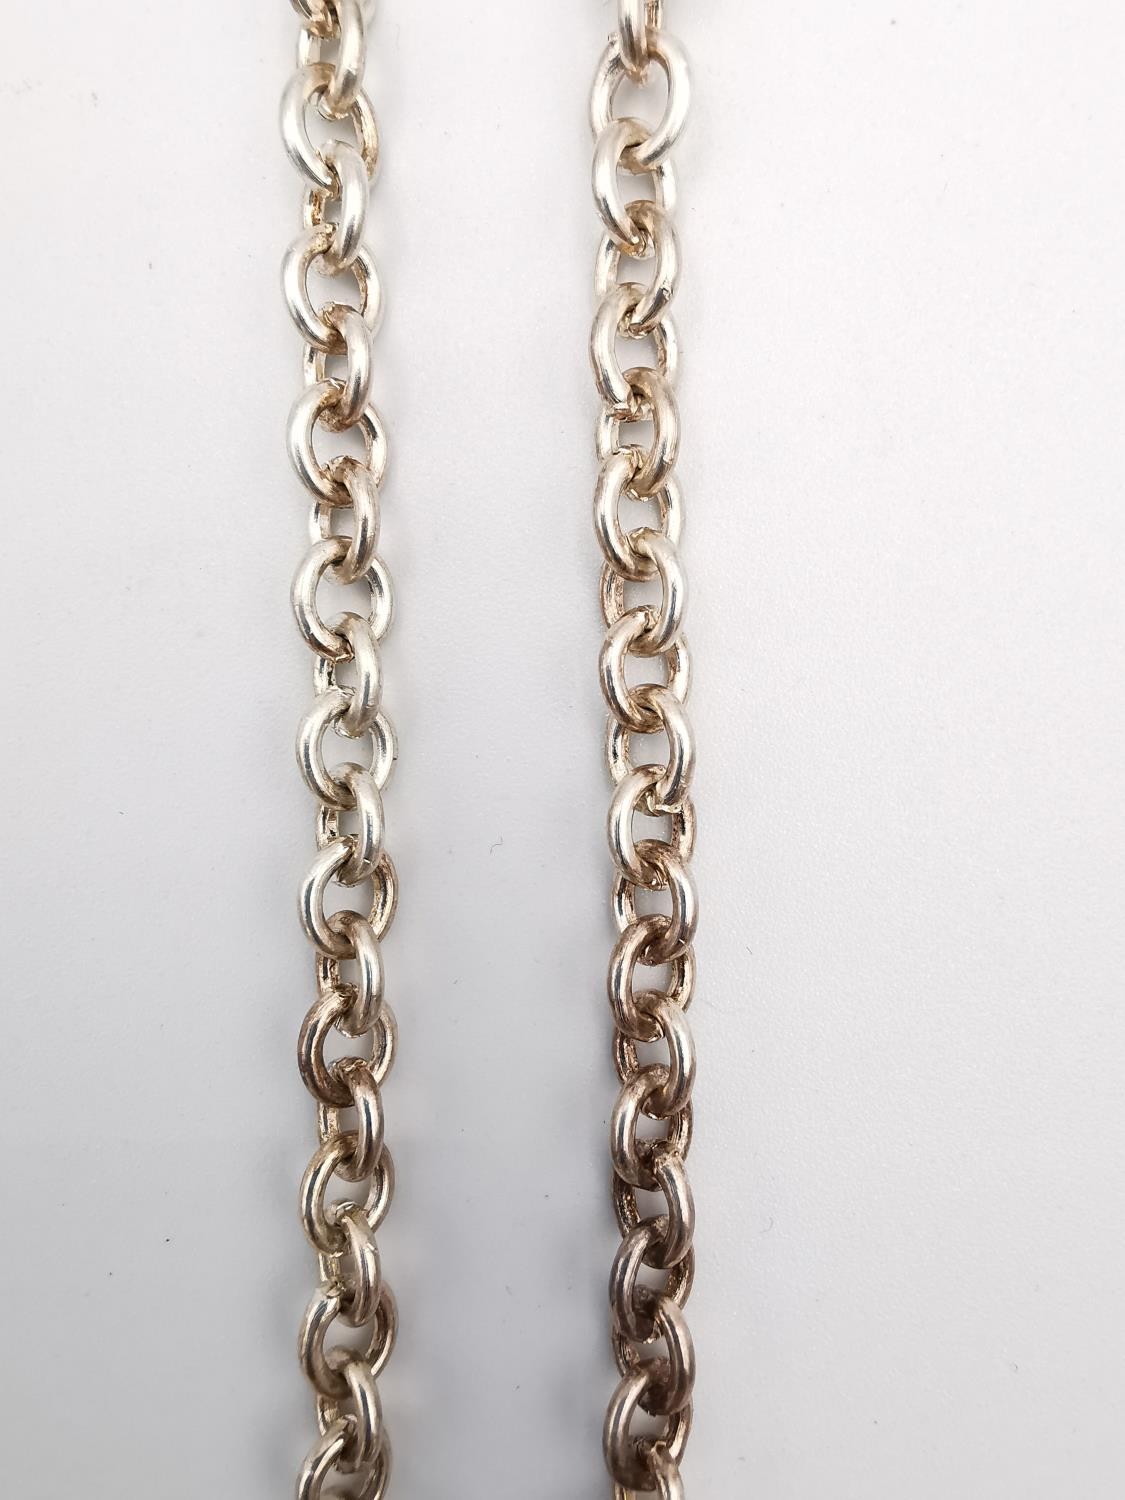 A white metal (tested as silver) brutalist style cylindrical pendant and oval link chain. - Image 5 of 5